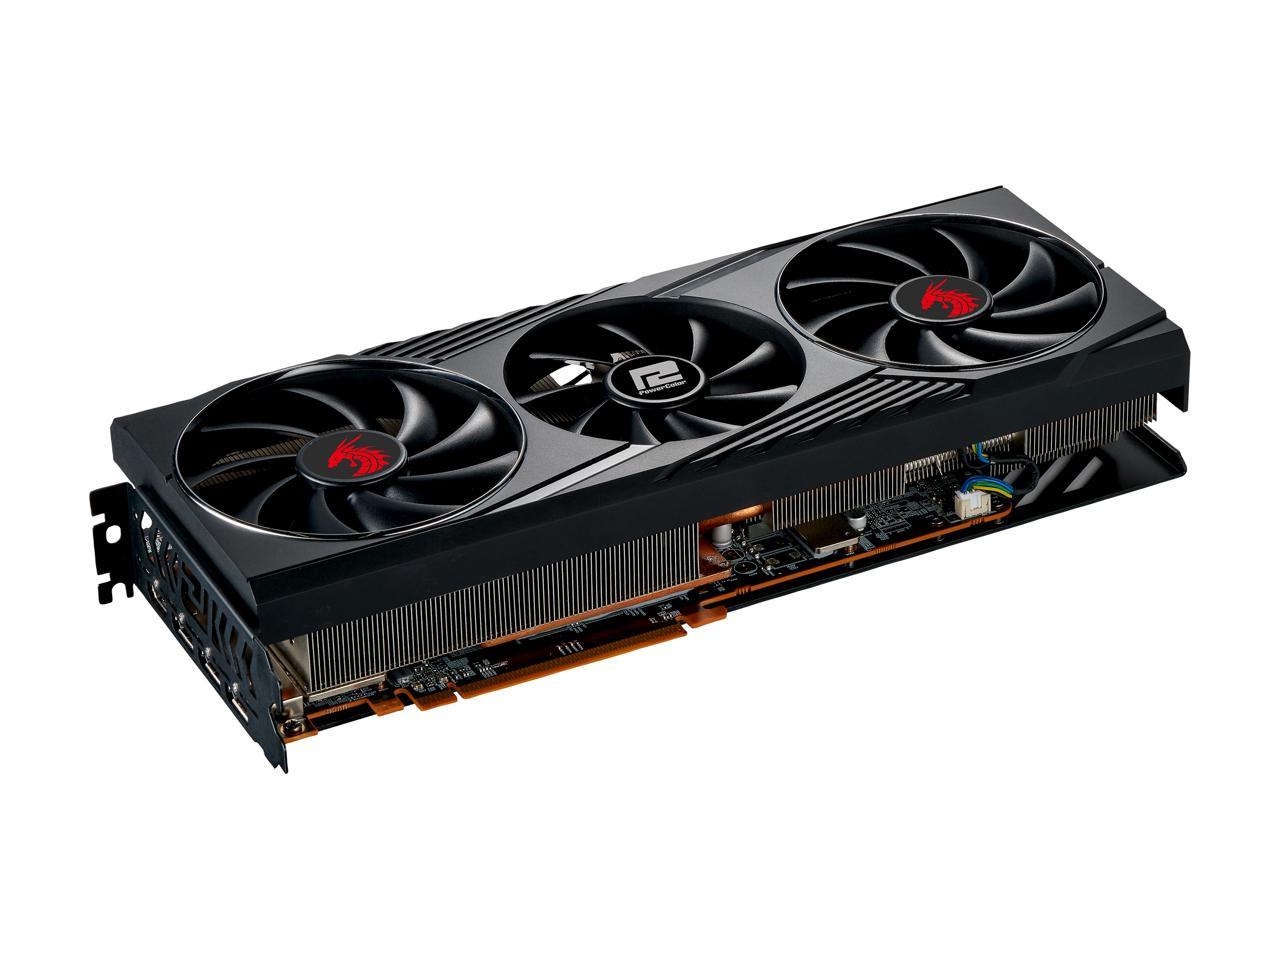 PowerColor Red Dragon AMD Radeon RX 6800 XT Gaming Graphics Card with 16GB  GDDR6 Memory, Powered by AMD RDNA 2, Raytracing, PCI Express 4.0, HDMI 2.1,  